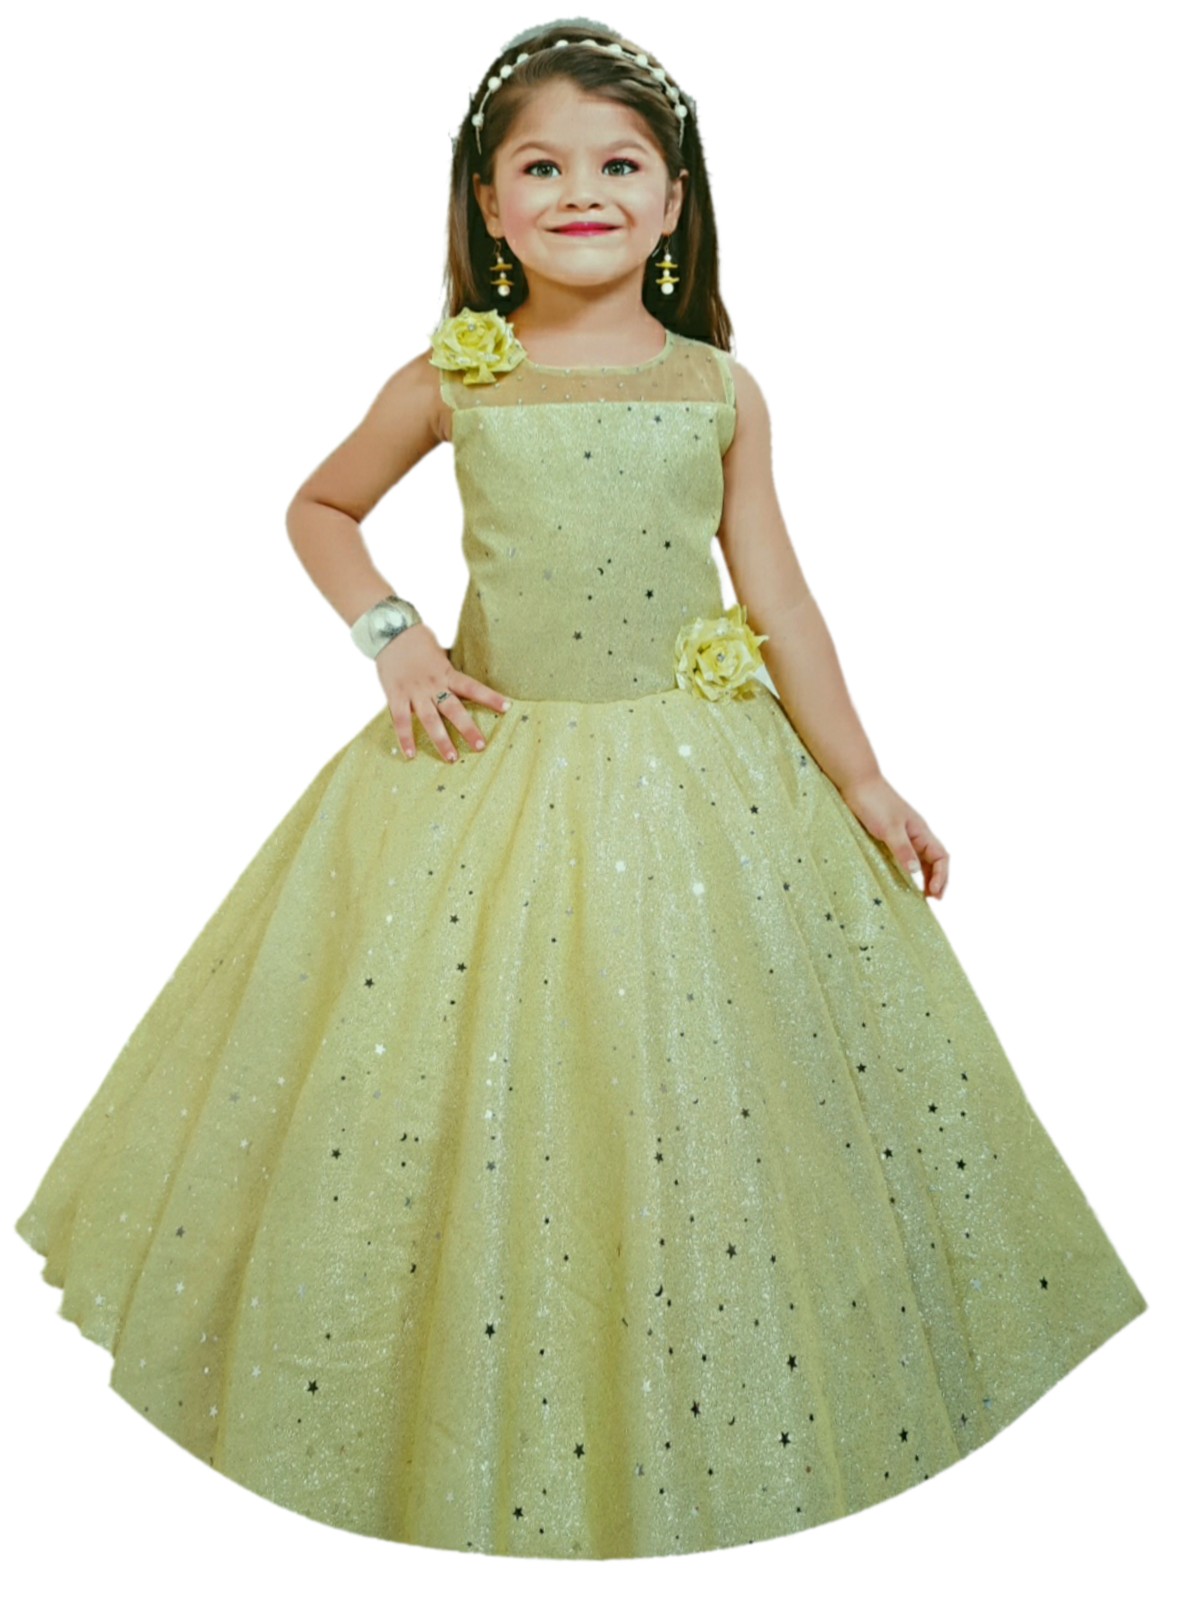 WDE Gold Lace Flower Girls Pageant Dresses Long Puffy India | Ubuy